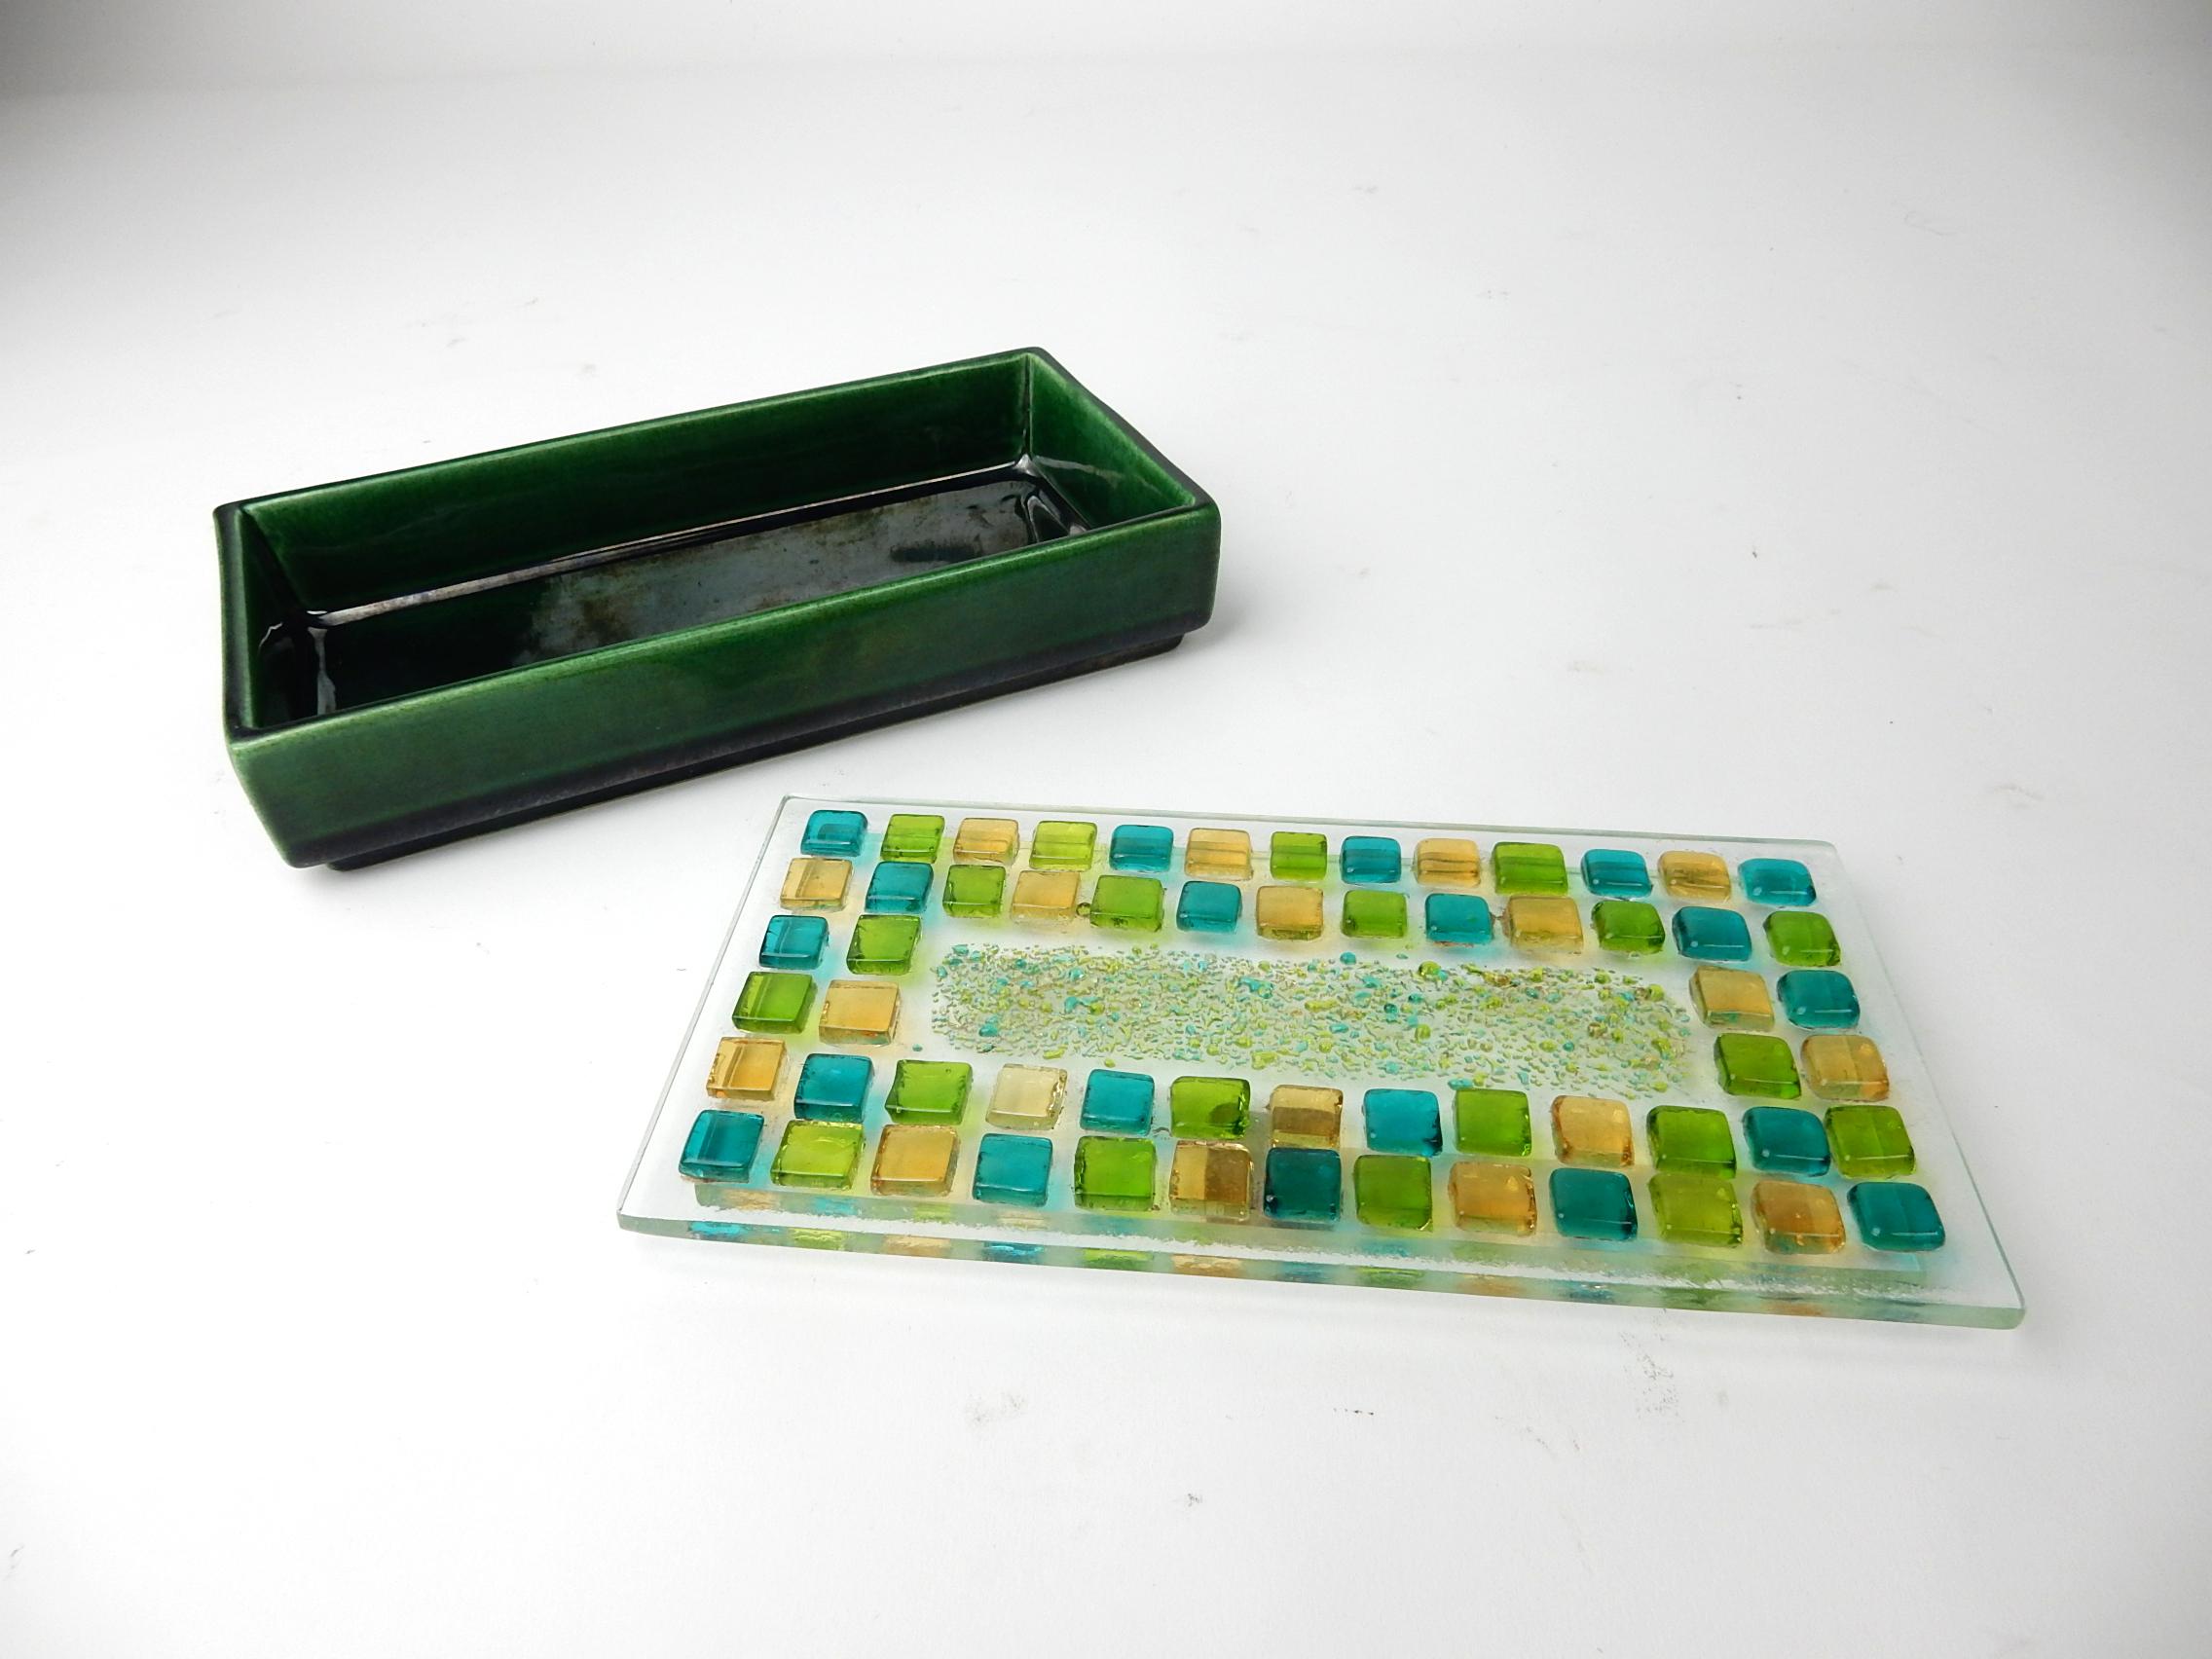 A perfect coffee table display this circa 1960s art glass smoking set by Annette Behre' of California.
Gorgeous set consisting of a fused blue, green and orange glass gem lid on a green ceramic box
with a blue/green swirl art glass ashtray to